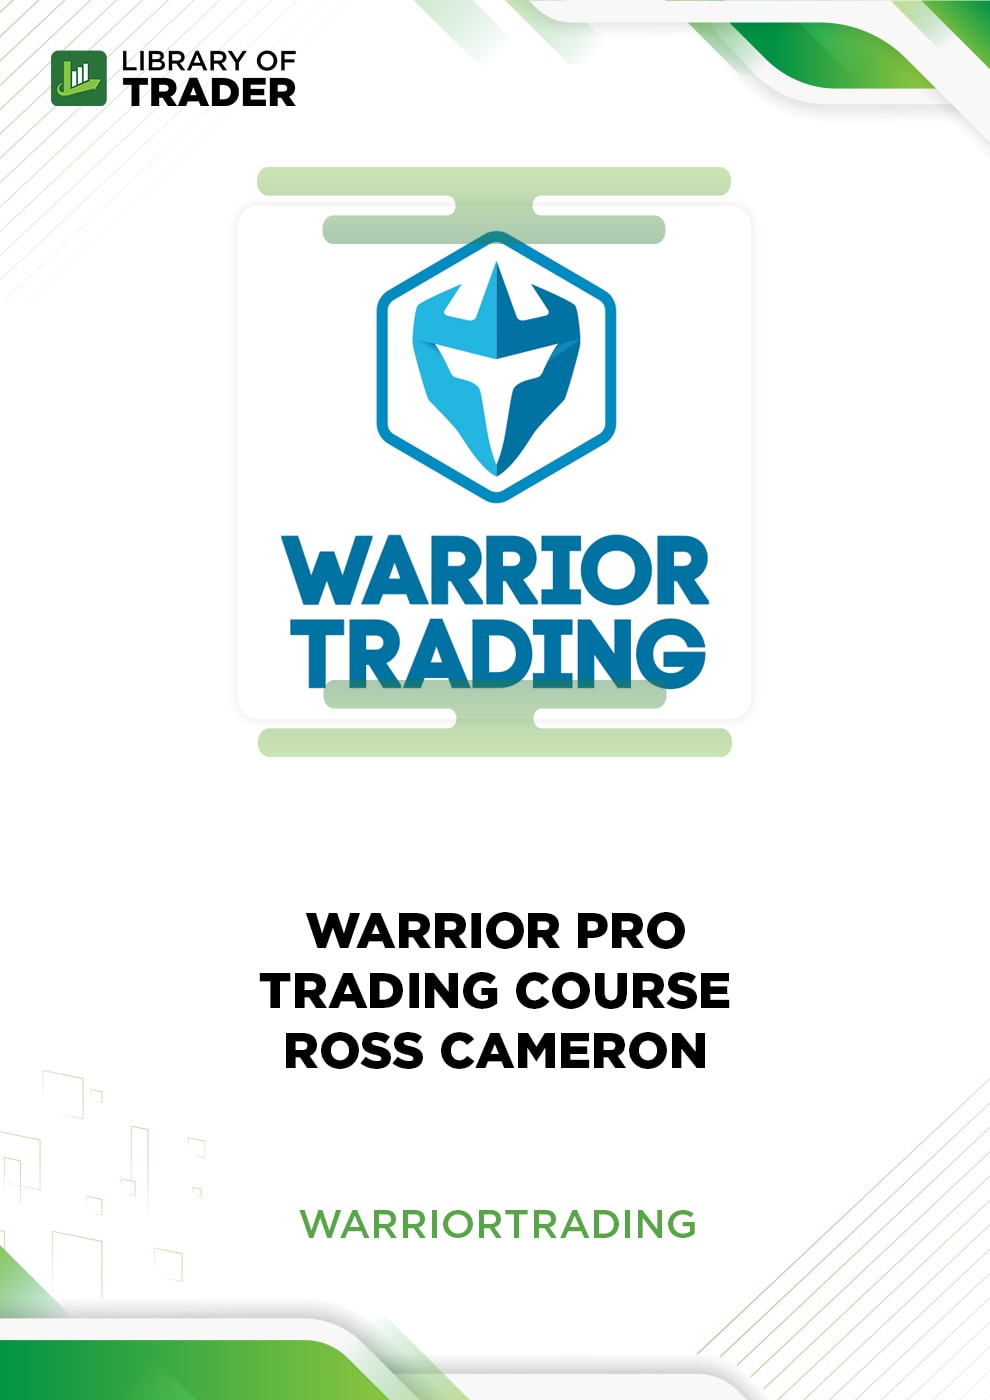 Warrior Pro Trading Course by Ross Cameron by Warriortrading